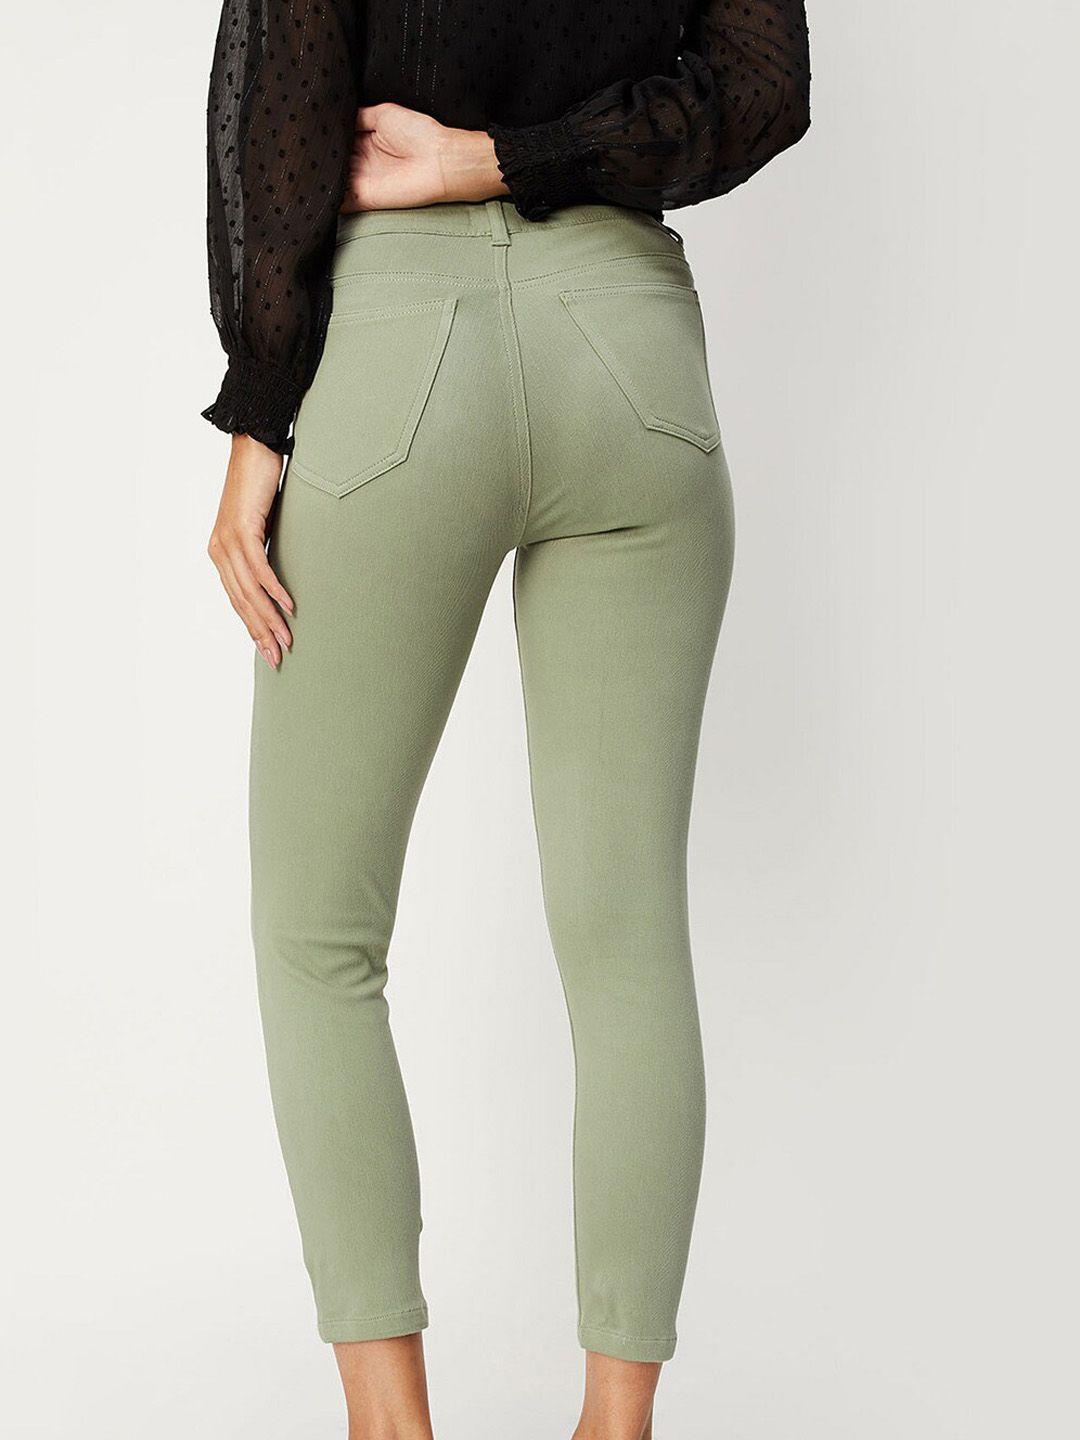 max women olive green jeans